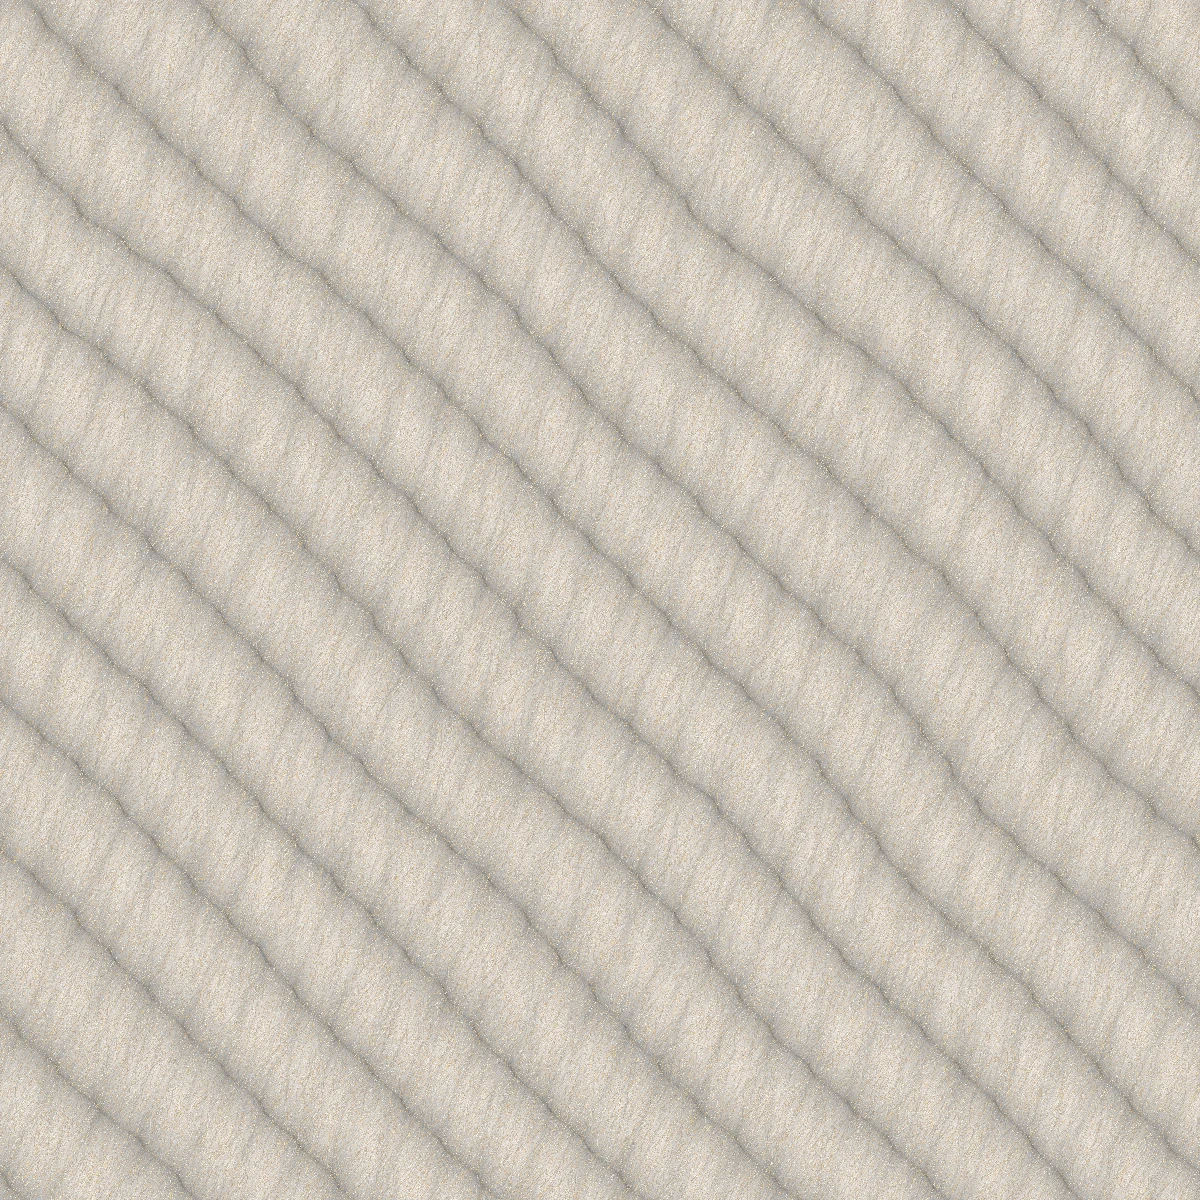 White Rope PBR Texture